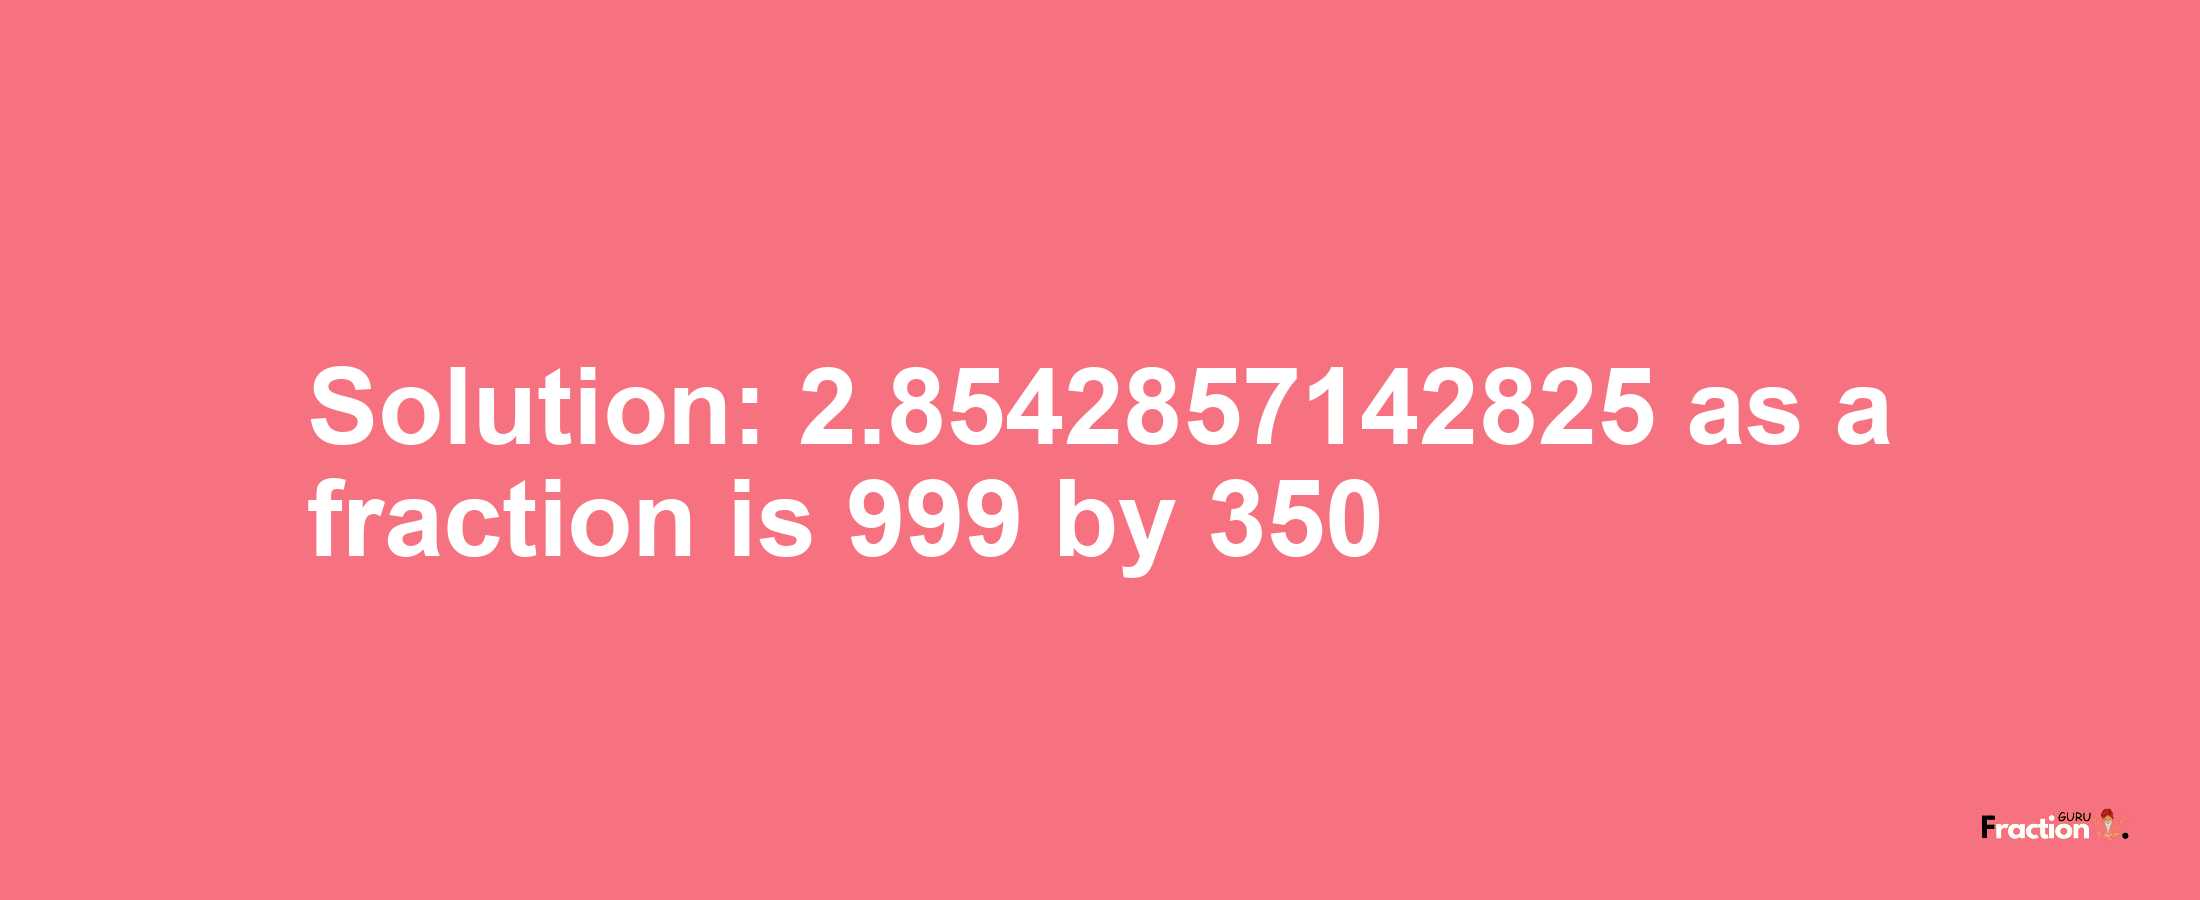 Solution:2.8542857142825 as a fraction is 999/350